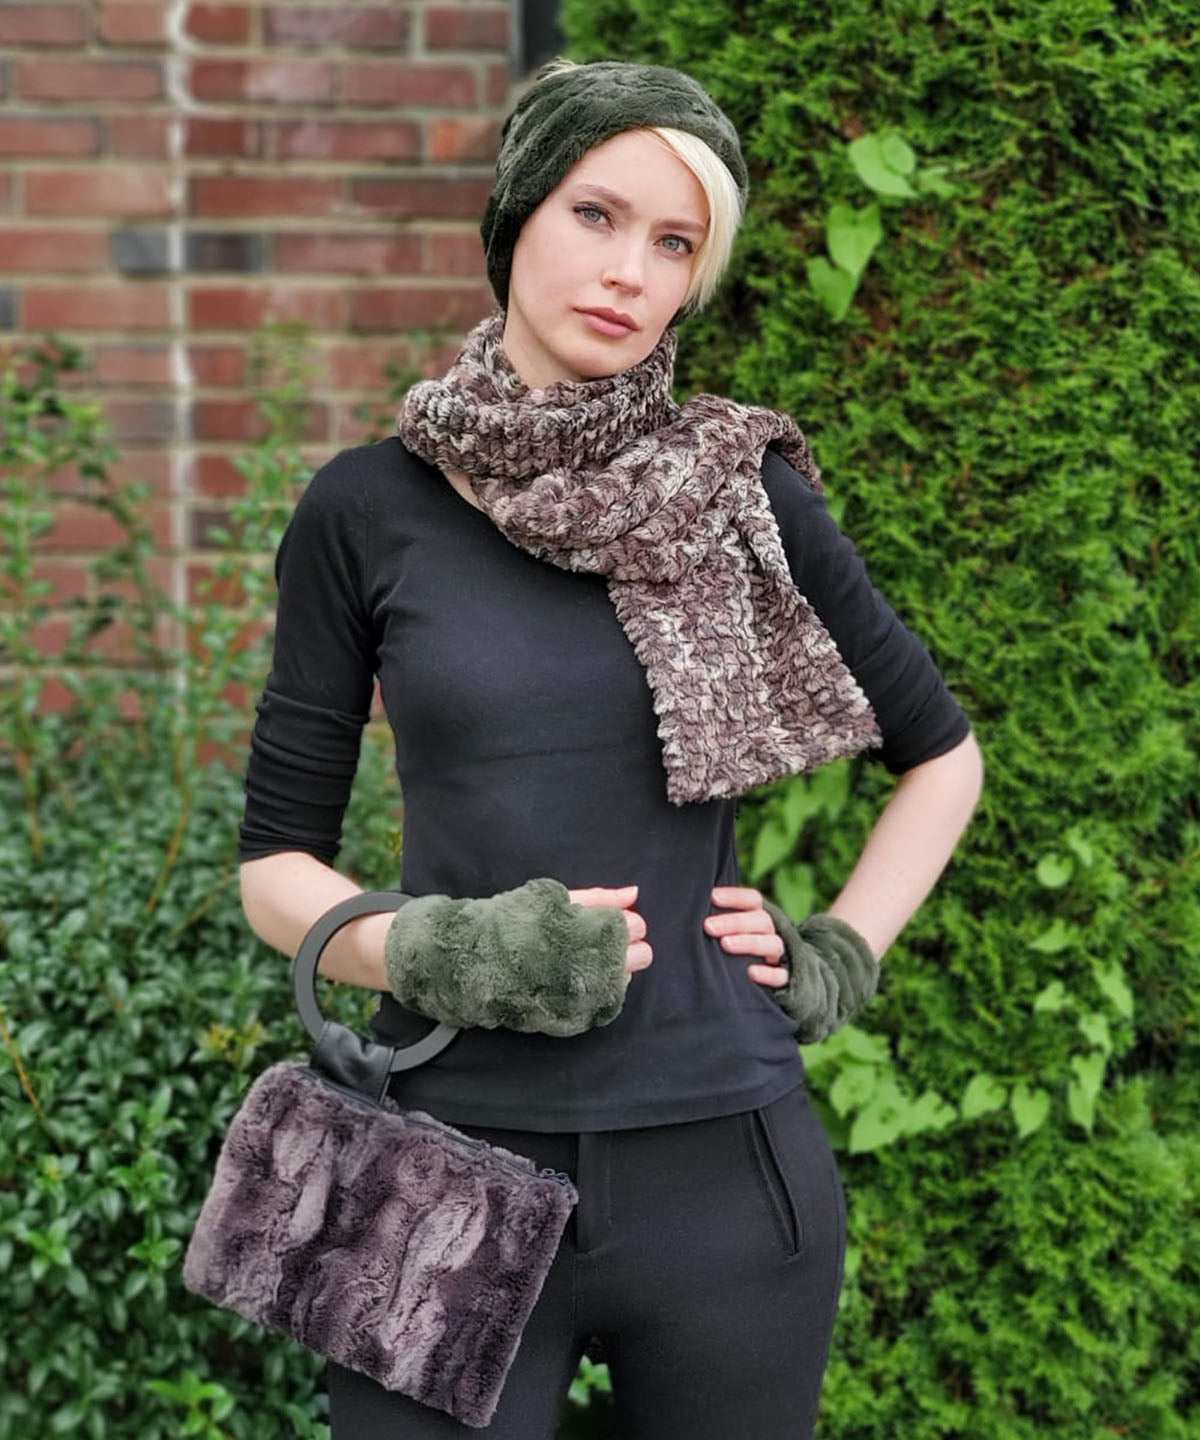 Model is wearing Fingerless in Cuddly Army Green Faux Fur and matching headband by Pandemonium Seattle. Handsewn in USA.